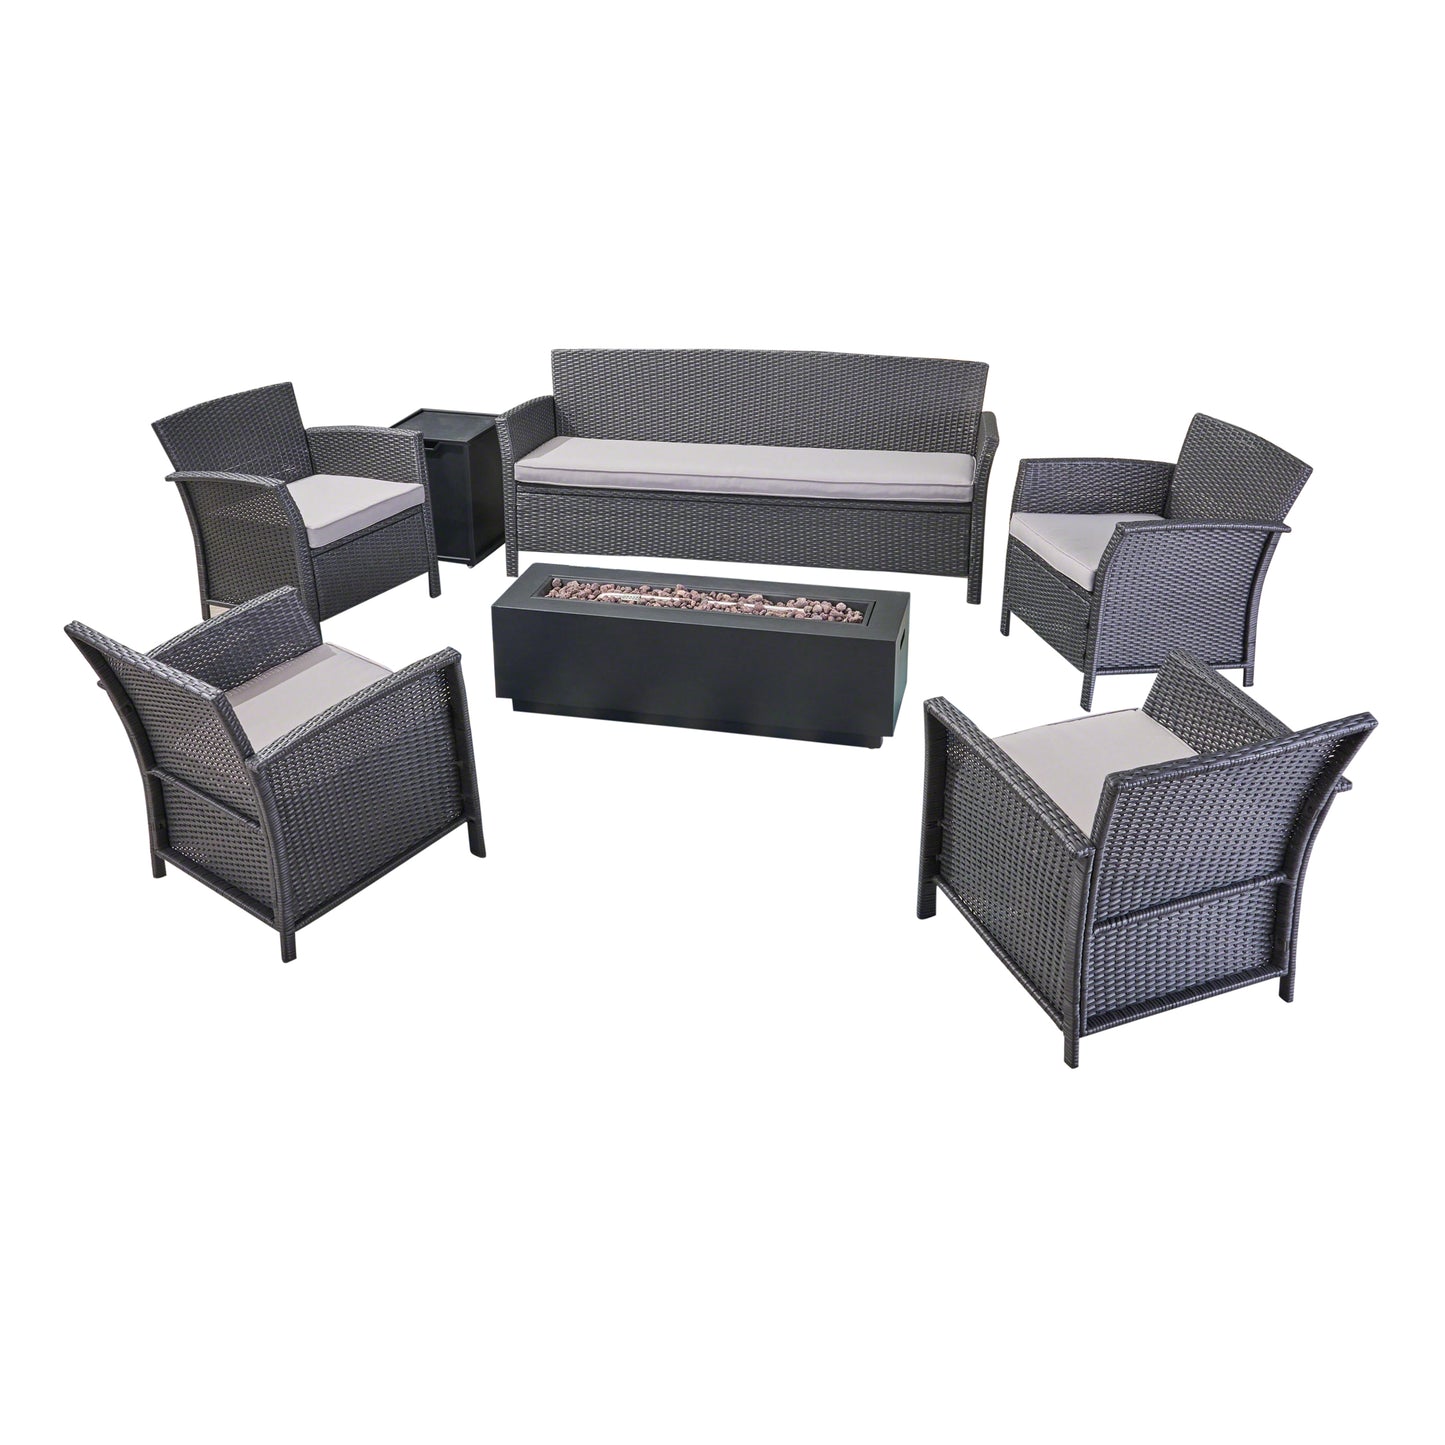 Mason Outdoor 7 Seater Wicker Chat Set with Fire Pit, Gray and Silver and Dark Gray